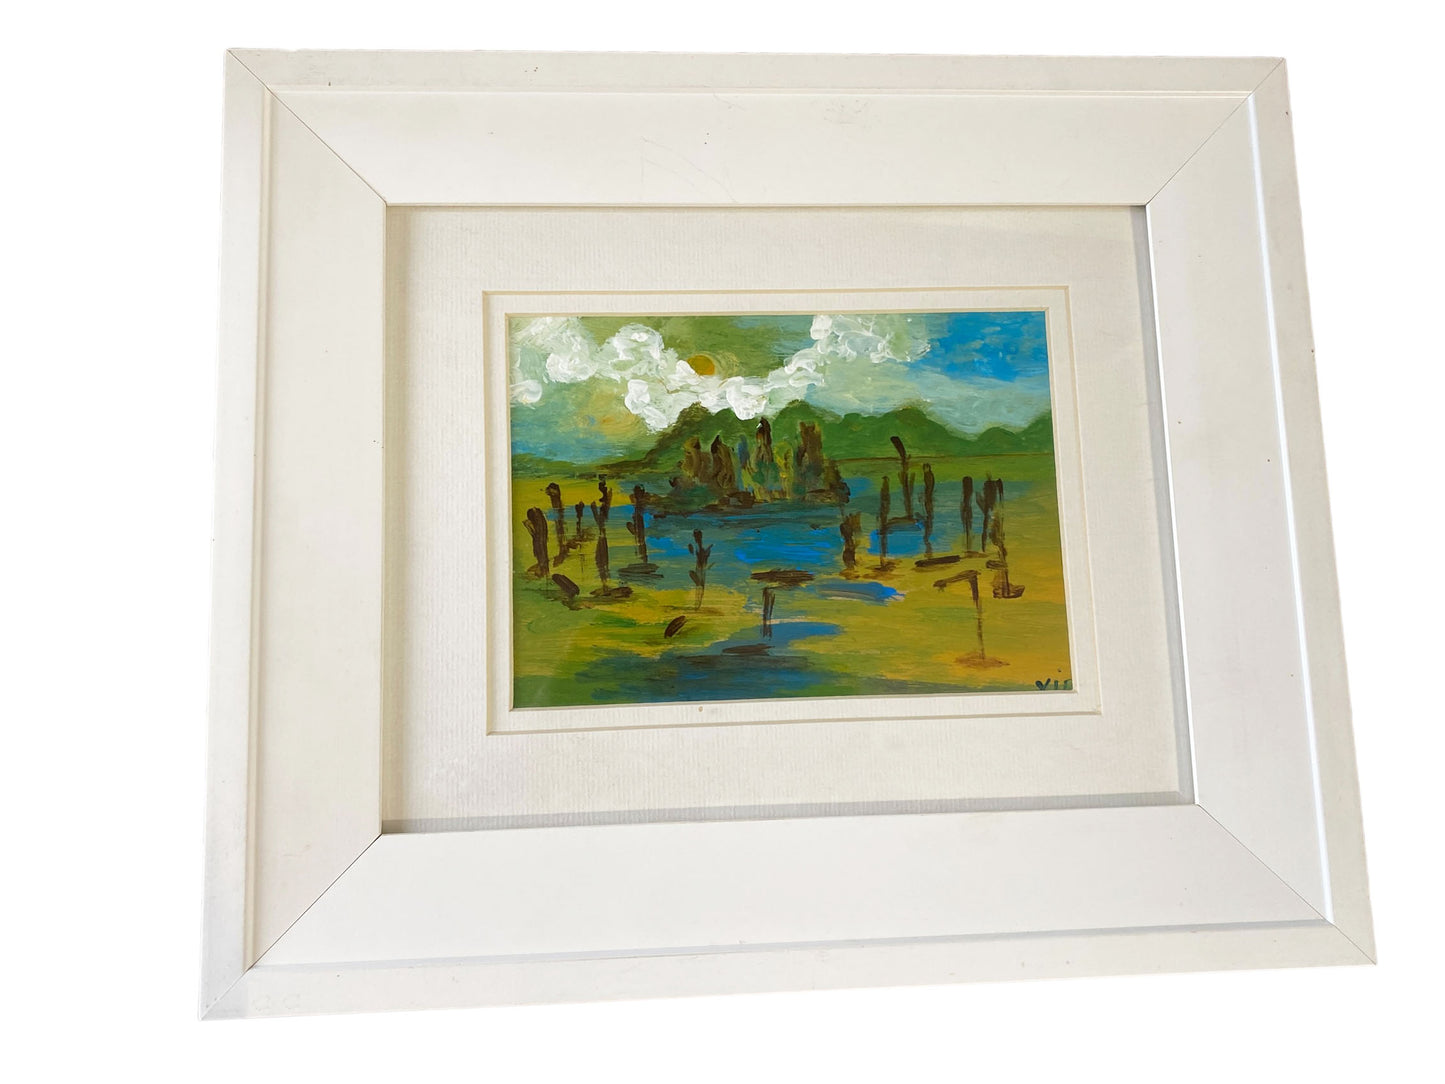 #2030 Acrylic (Marécage) )Landscape on Paper Framed  13.25" by 11.25" By YJR